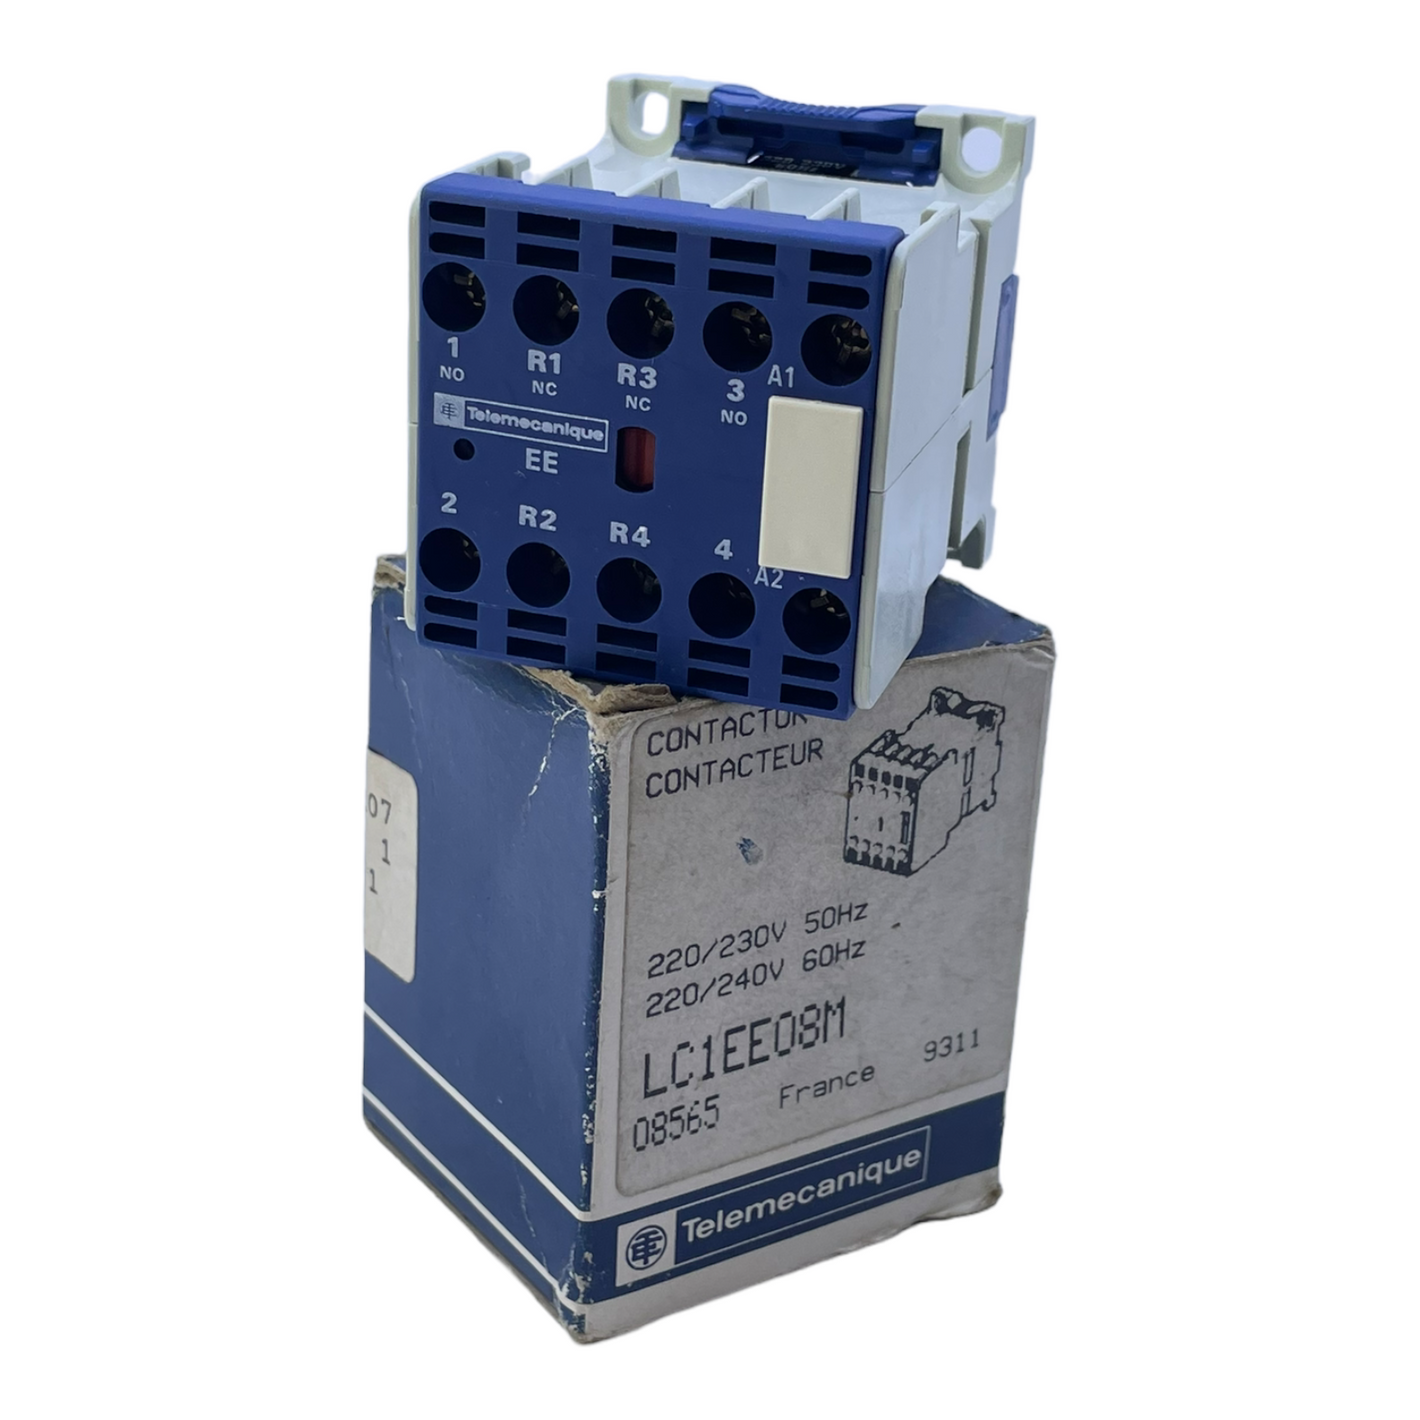 Telemanique LC1EE08M power contactor for industrial use 220-230V 50Hz